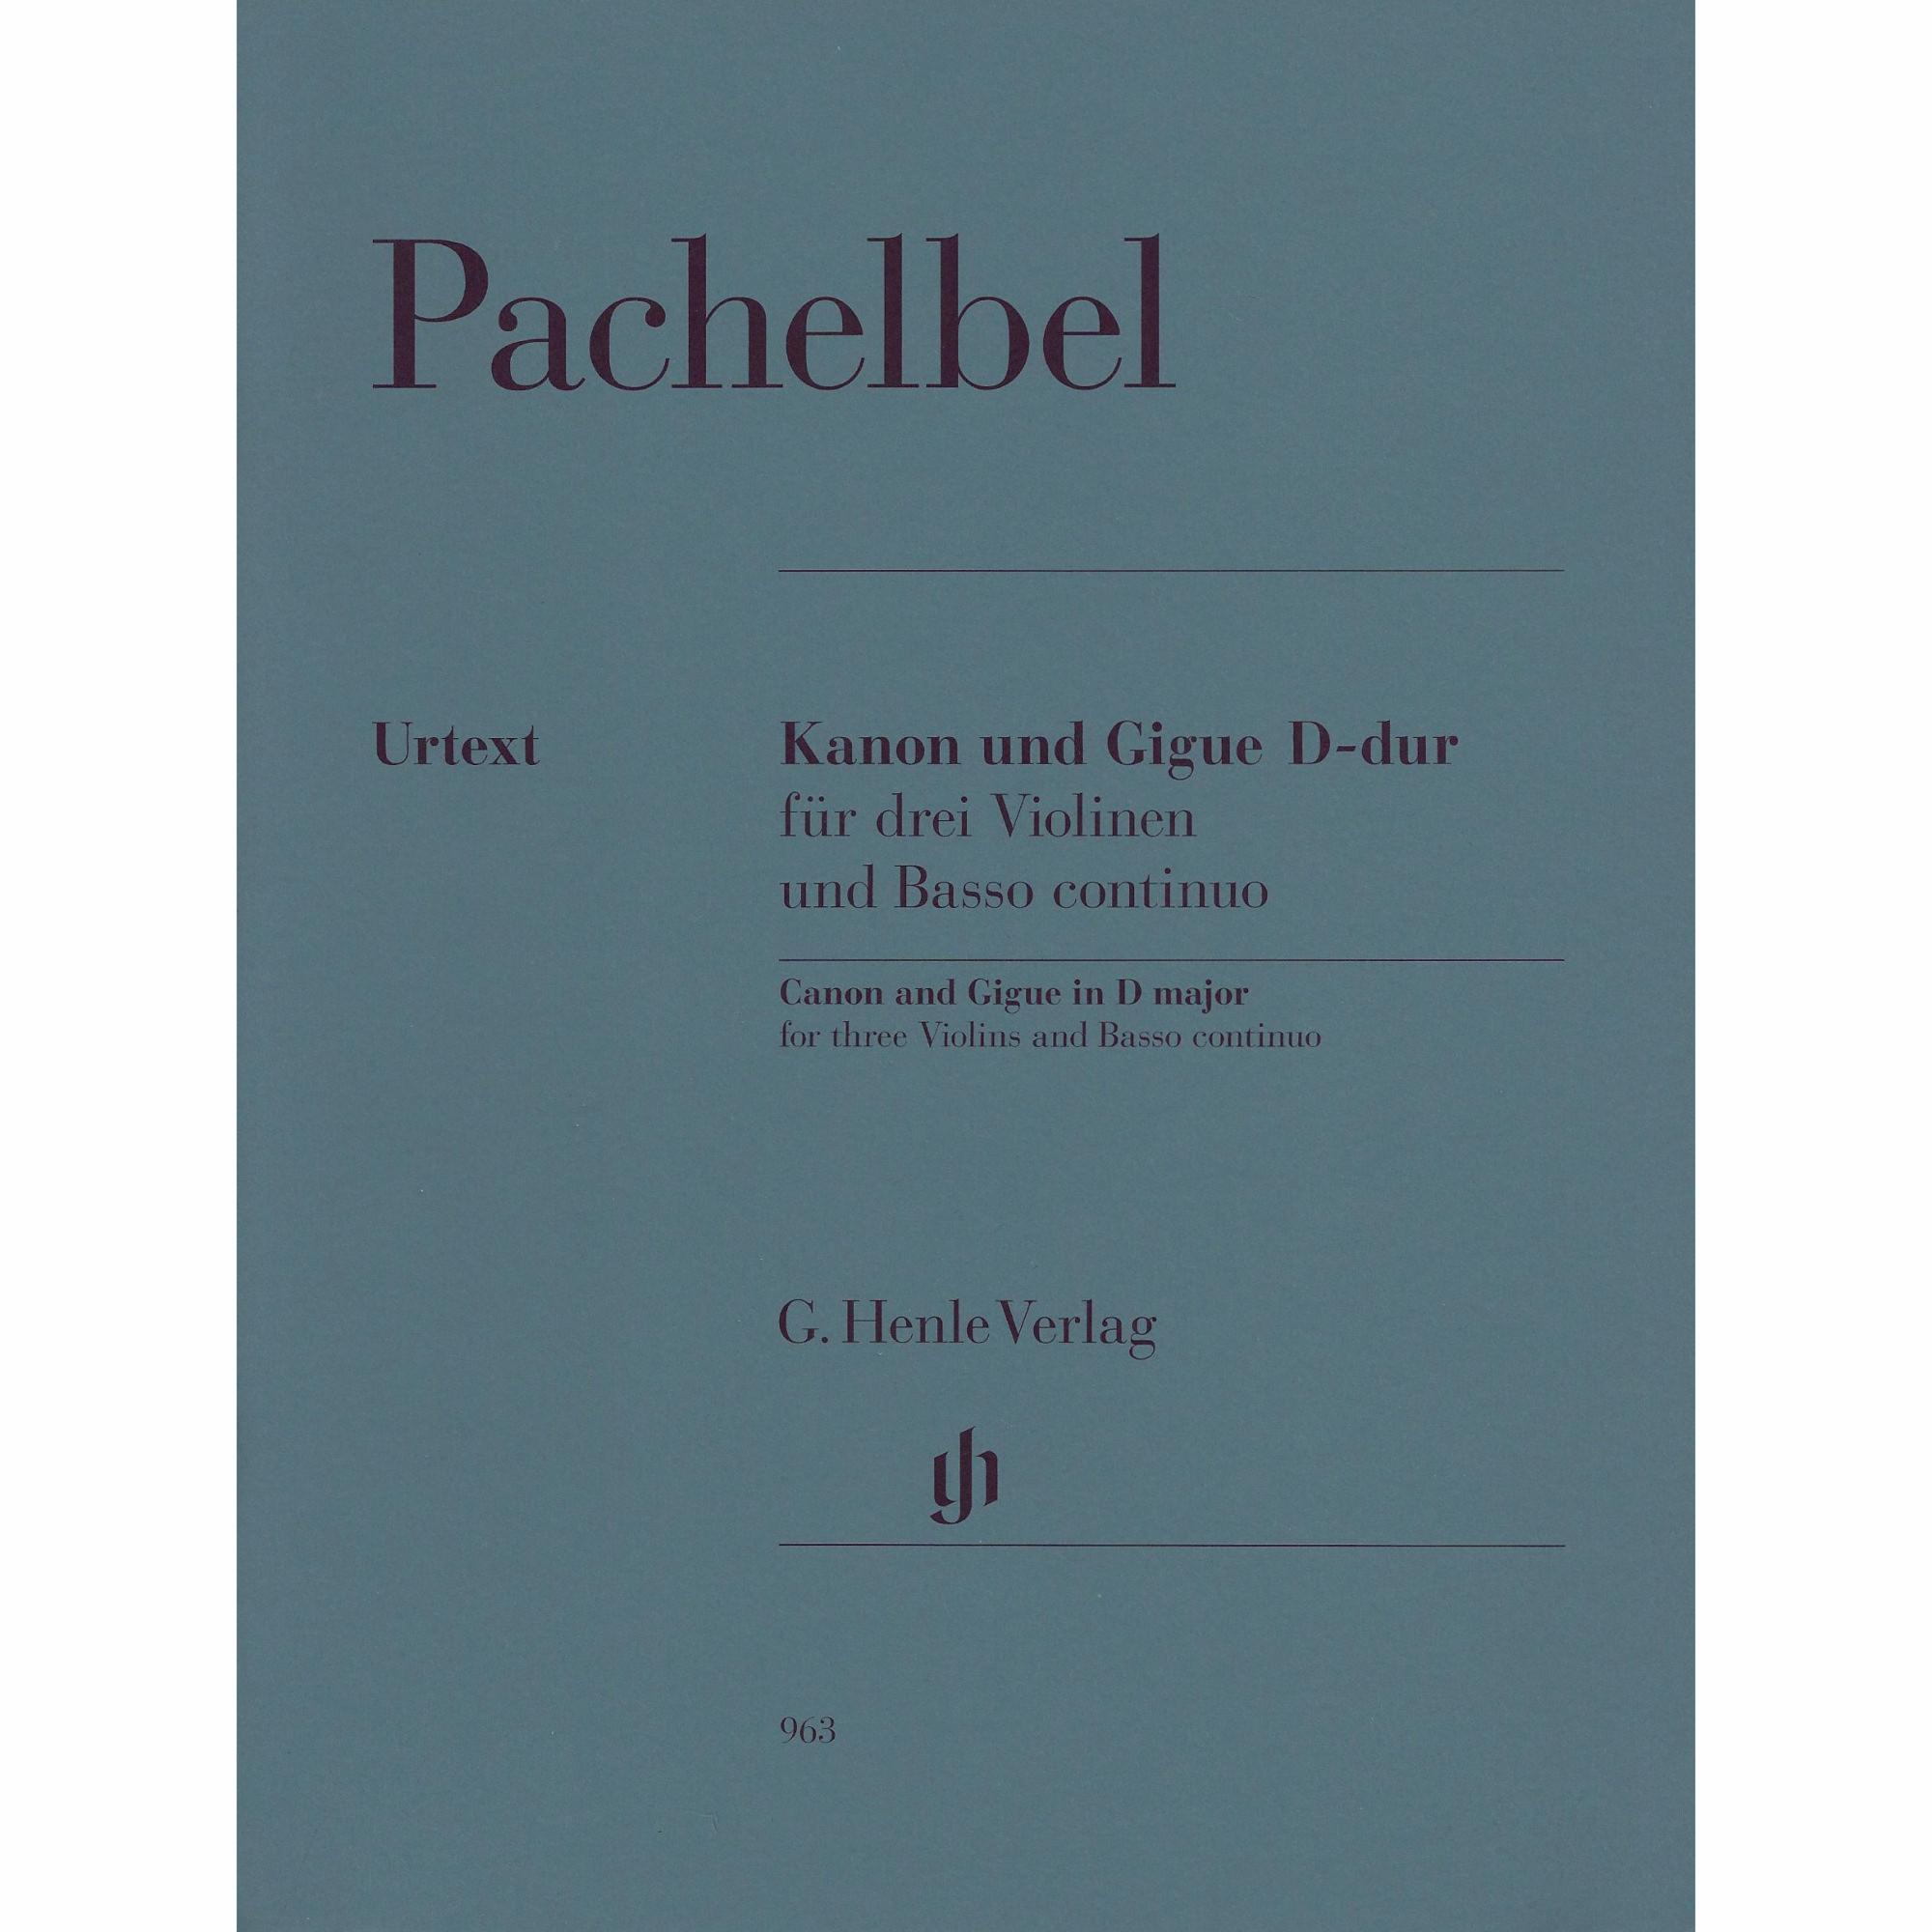 Pachelbel -- Canon and Gigue in D Major for Three Violins and Basso Continuo